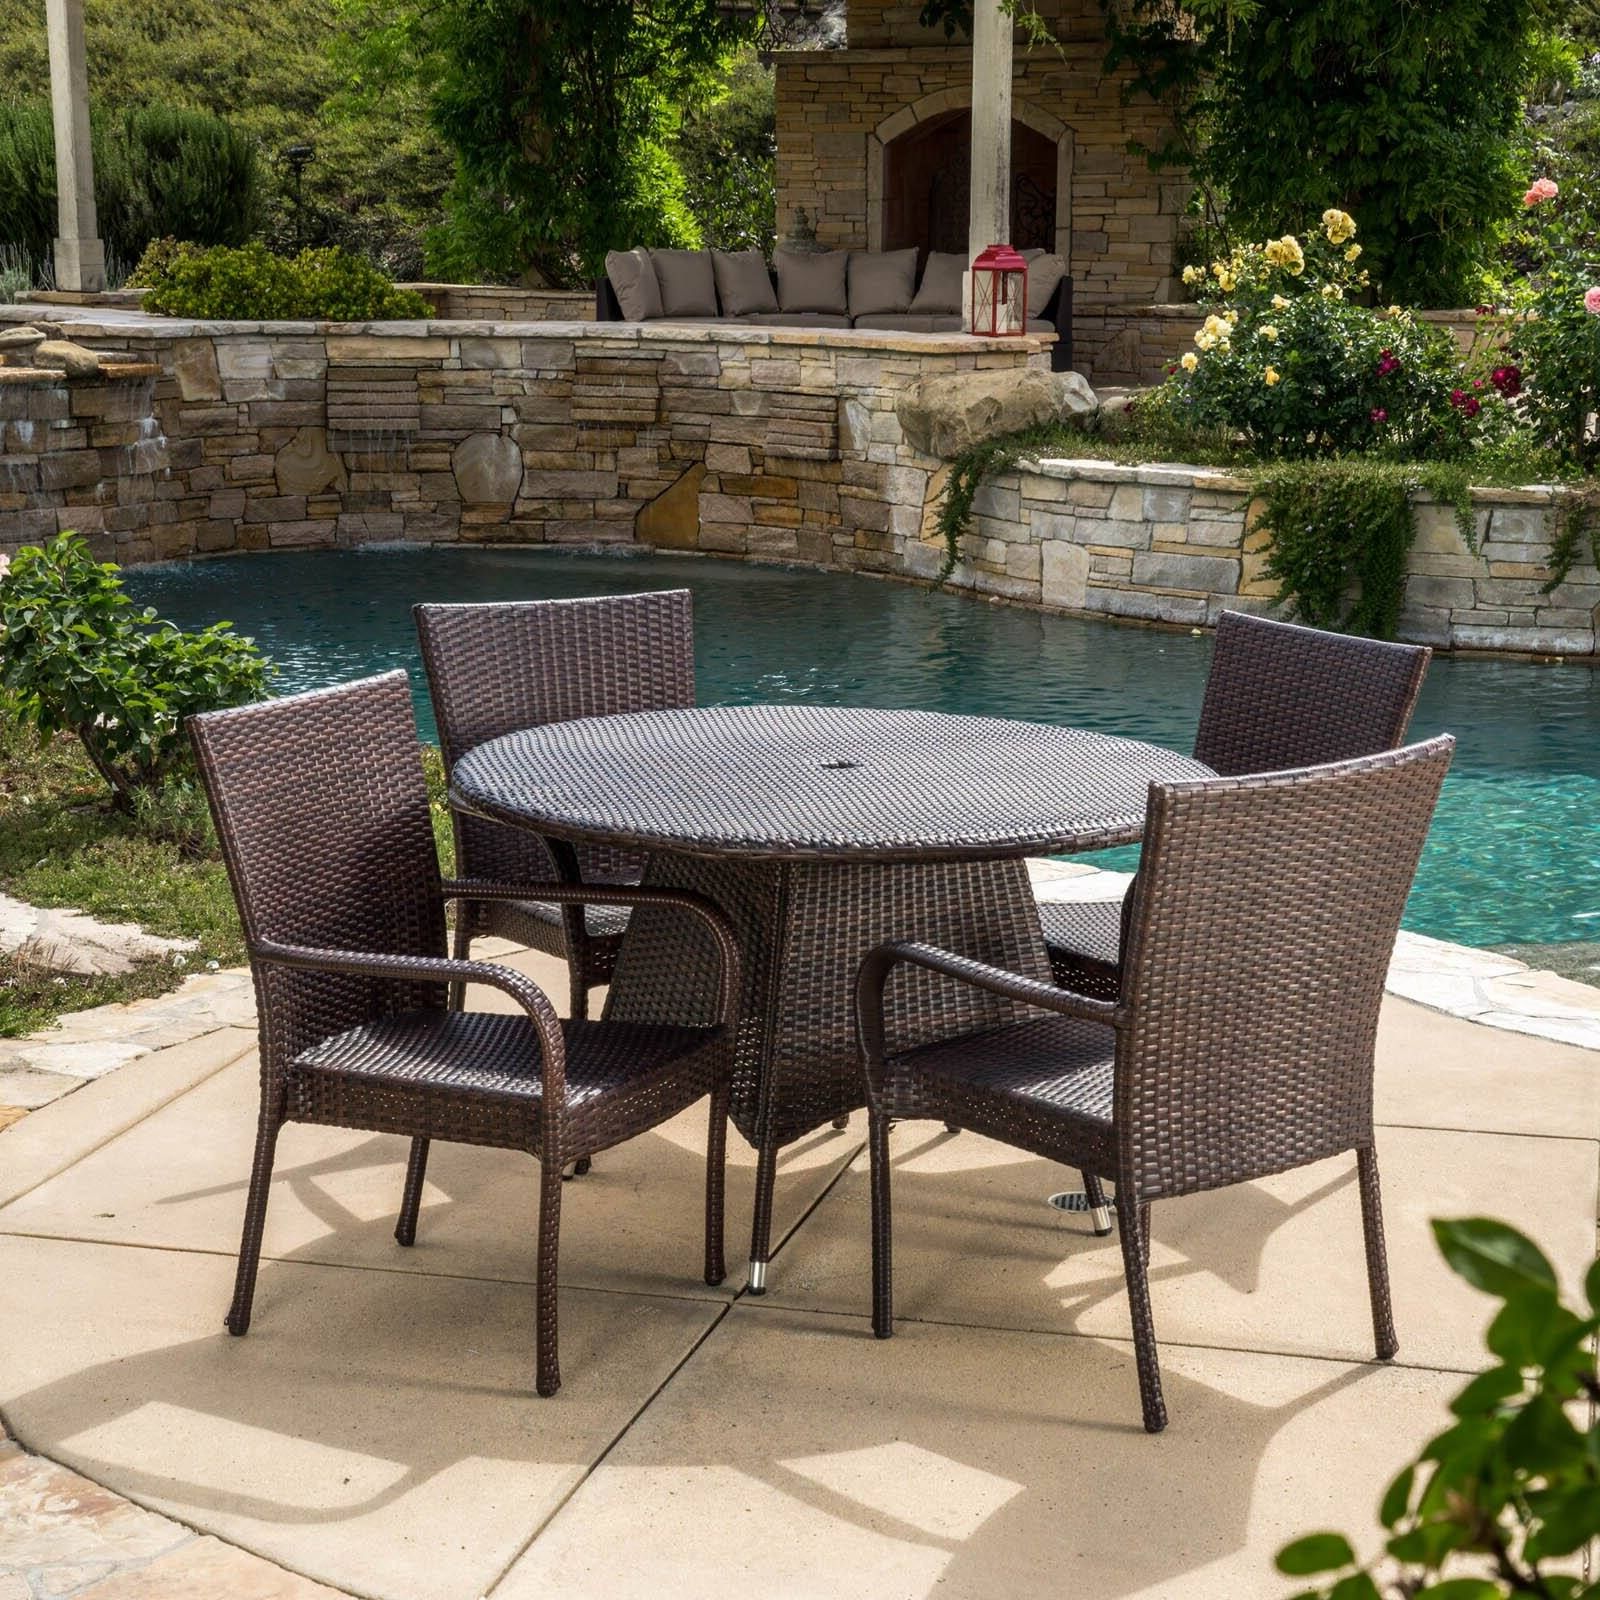 Popular Potter Wicker 5 Piece Round Patio Dining Set – Walmart – Walmart Pertaining To Wicker 5 Piece Round Patio Dining Sets (View 1 of 15)